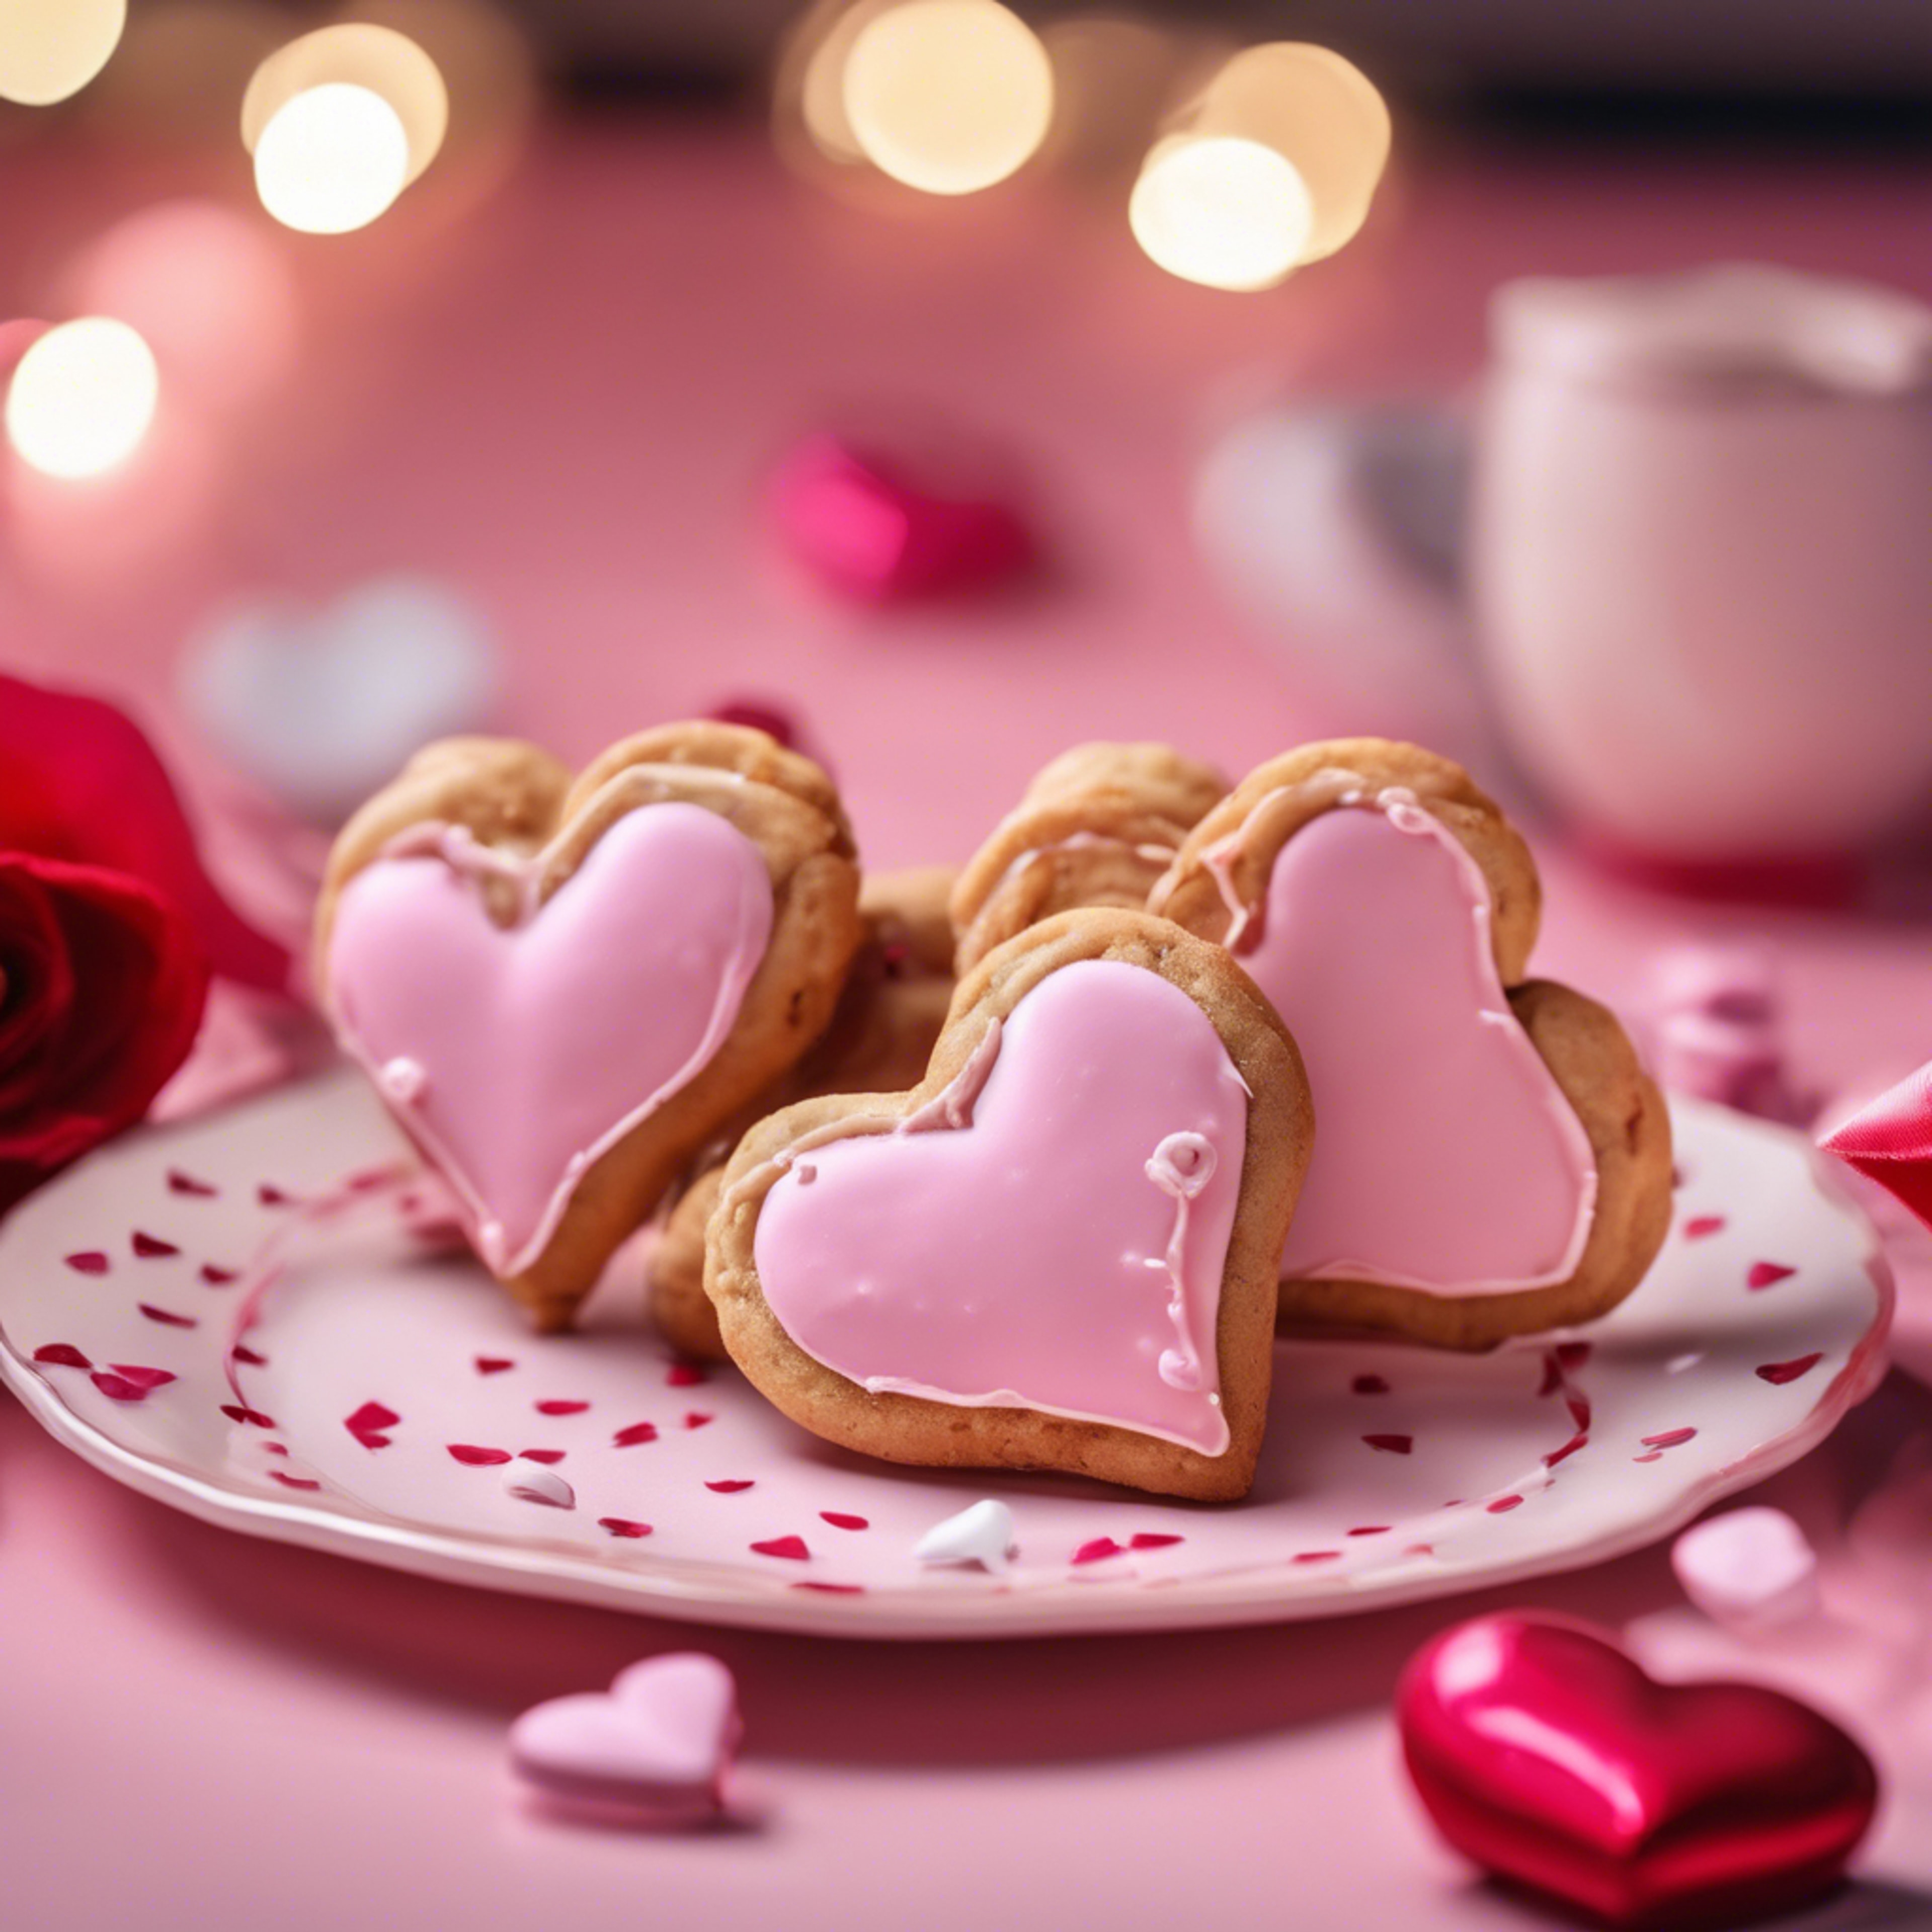 A pair of heart-shaped frosted cookies on a vibrant Valentine's day setting.壁紙[699c1bd667c44183af85]